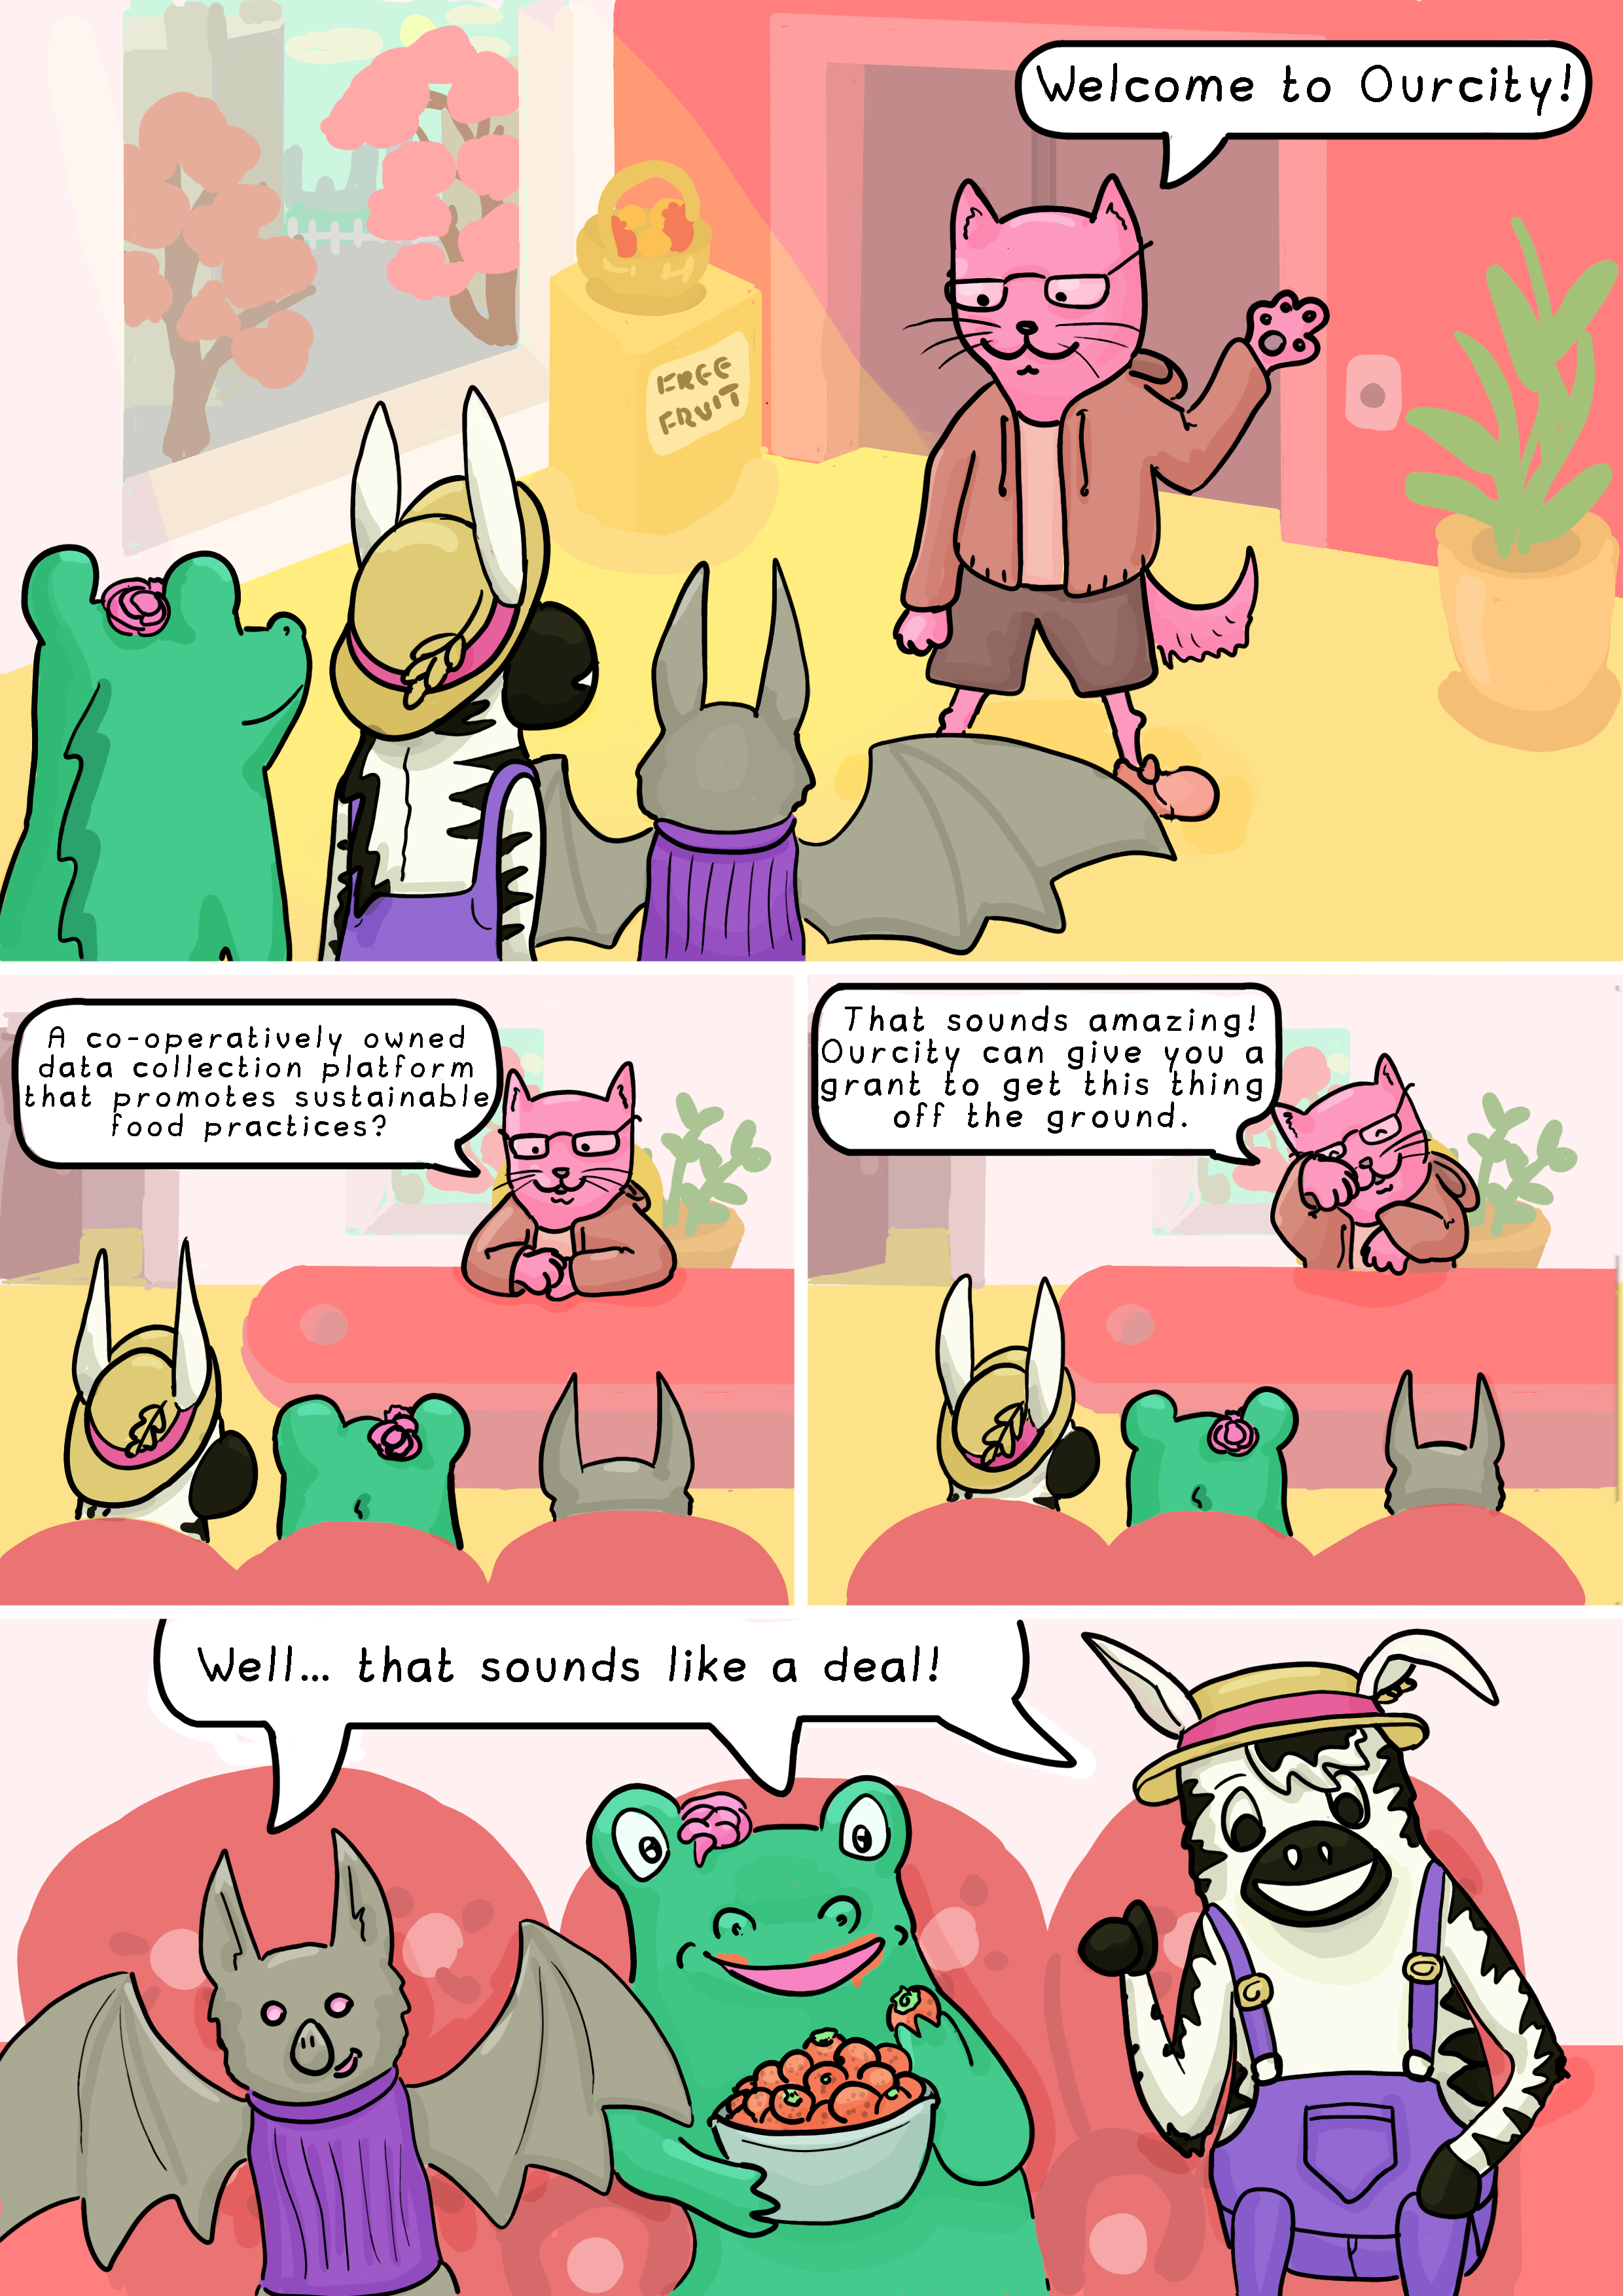 Page 7. Panel 1: The animals arrive at Ourcity, a credit union. It is well-lit and brightly-coloured, there are plants and free fruit in the lobby. They are greeted by a community investor, who is a pink cat. The community investor says: 'Welcome to Ourcity!'

        Panel 2: At the community investor's office. The office is bright and full of plants. The community investor says: 'A co-operatively owned data collection platform that promotes sustainable food practices?'

        Panel 3: The community investor says: 'That sounds amazing! Ourcity can give you a grant to get this thing off the ground.'

        Panel 4: The animals are sitting on comfy red chairs and Alligator is eating strawberries out of a bowl. They say in unison: 'Well… that sounds like a deal!'